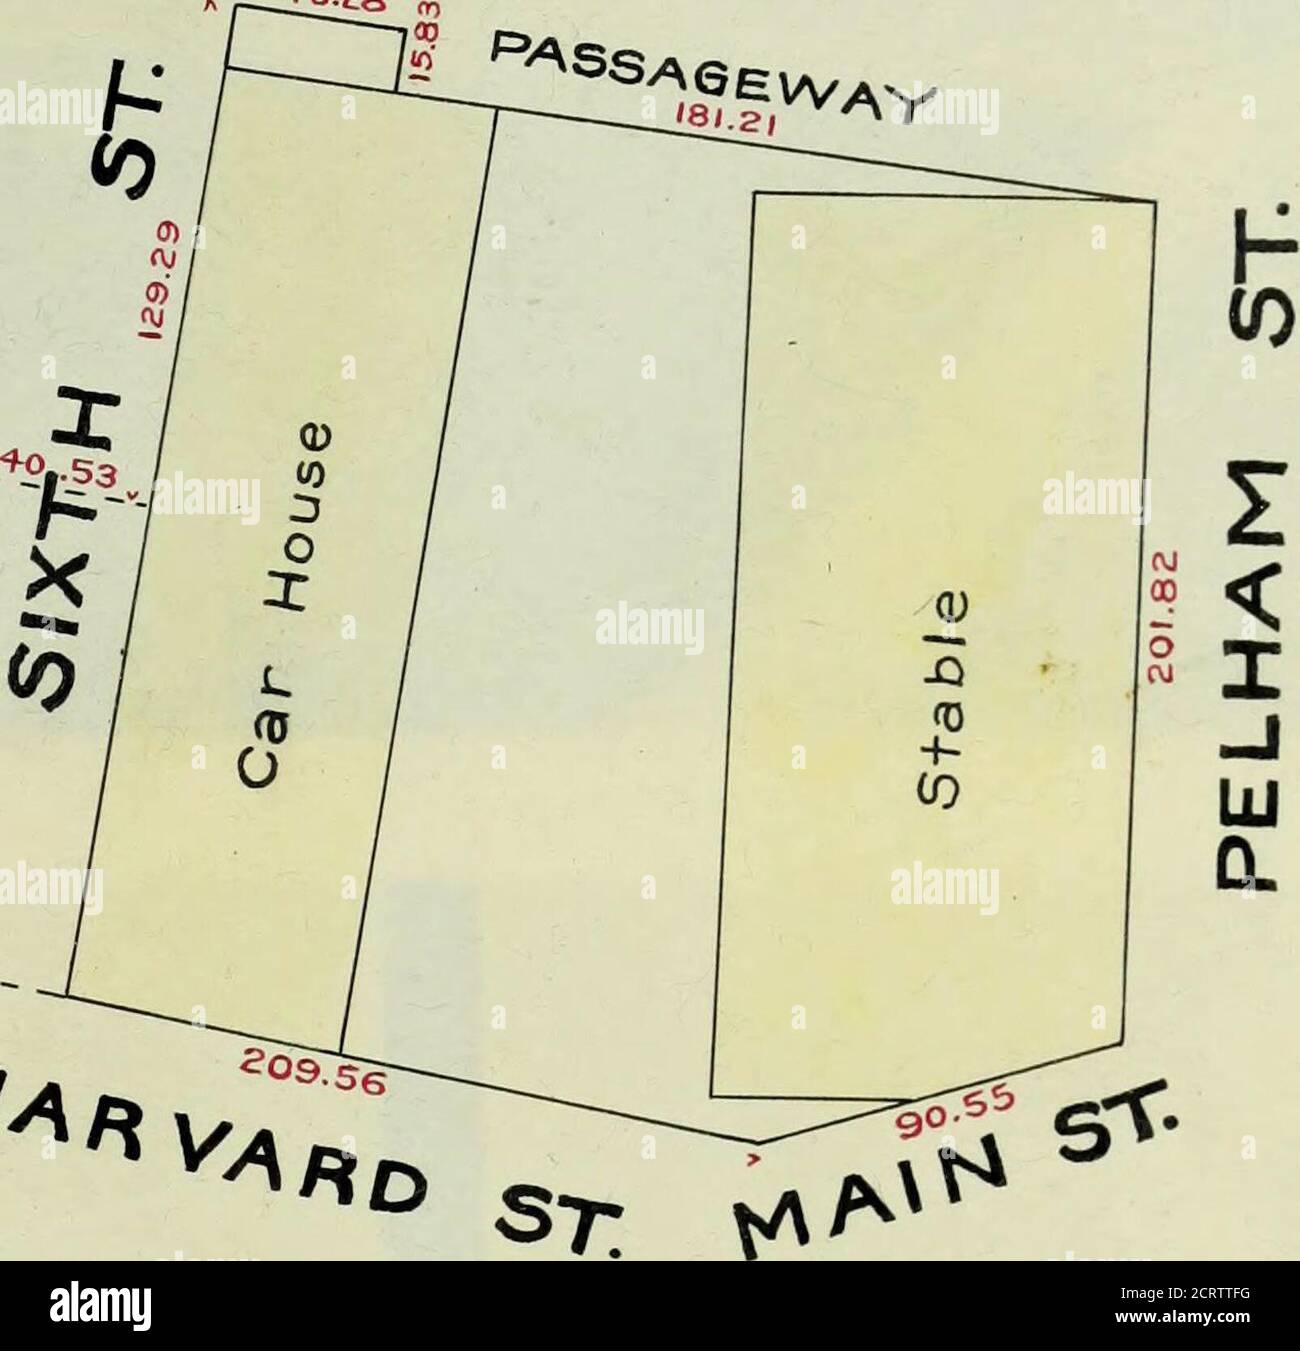 Inventory of the West End Street Railway Company . 218 *°za o/ — / / *M* IS  pASs 3£f,^AY. Sixth St. Car House Lot CAMBRI DQE Area 55935 Sq.Feet  Scale,lin.-80ft. 0c+ober,l89Z